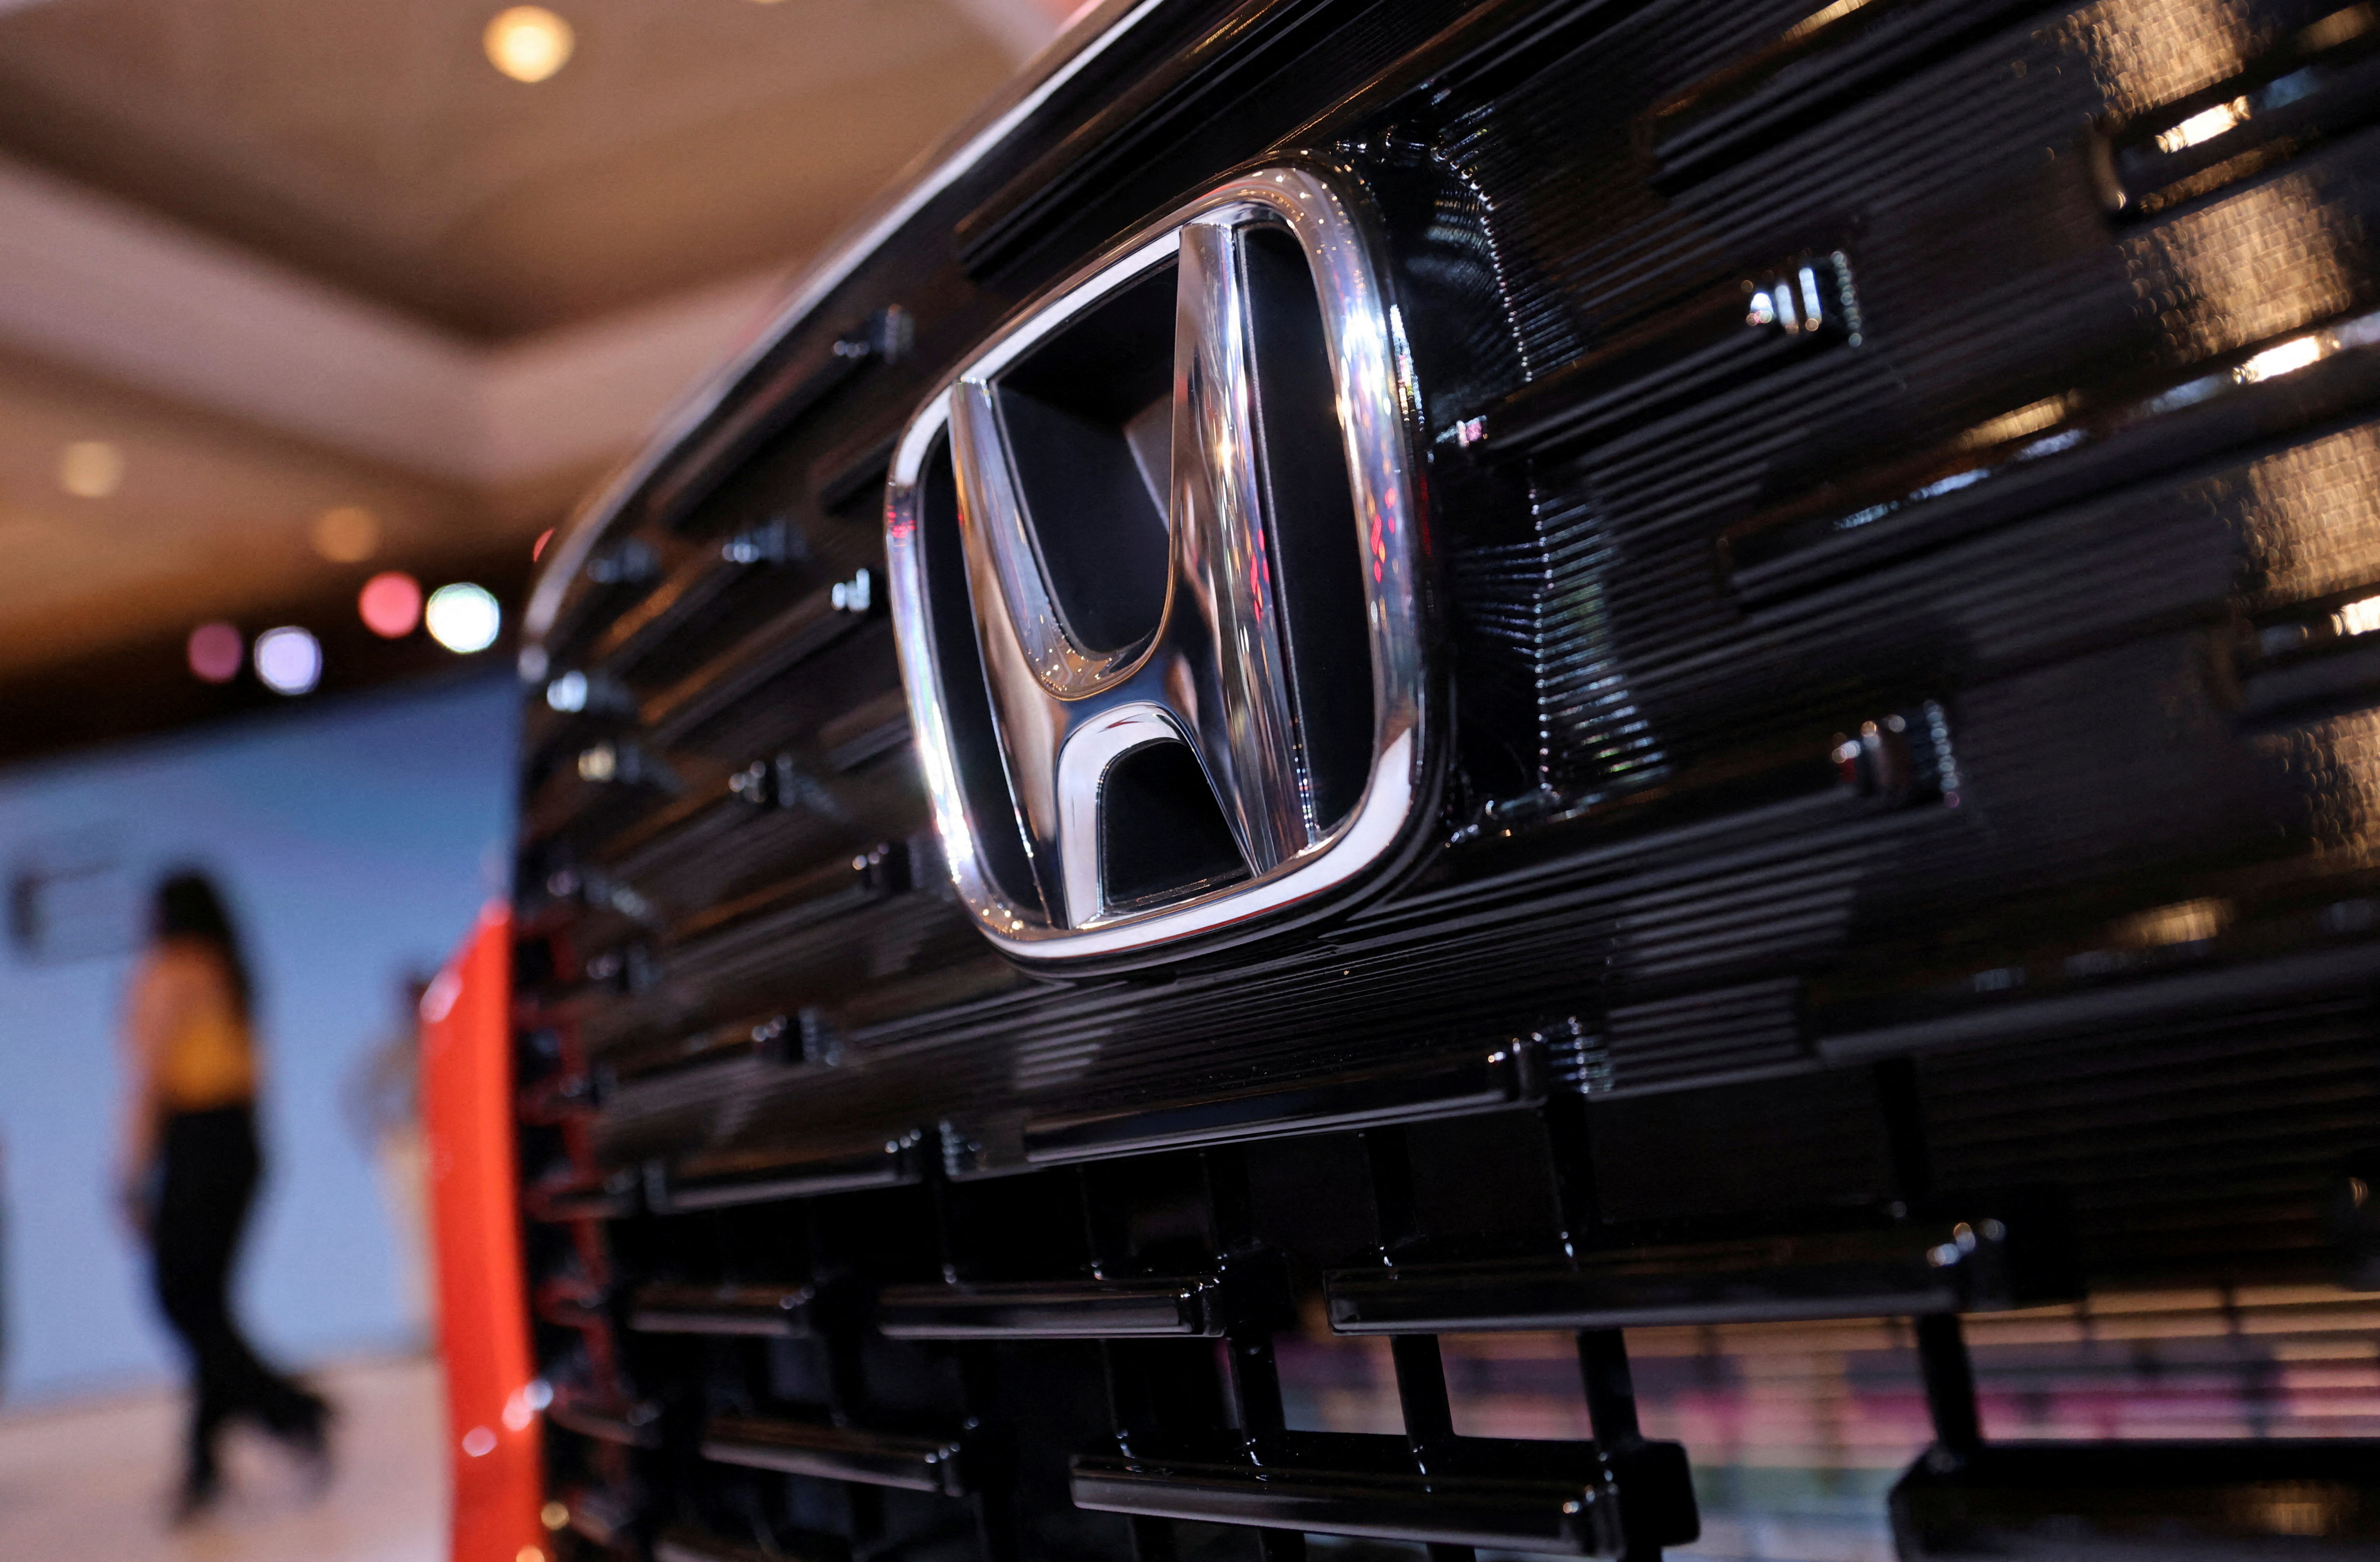 Honda considers $14 billion plan for EV production in Canada, Nikkei  reports